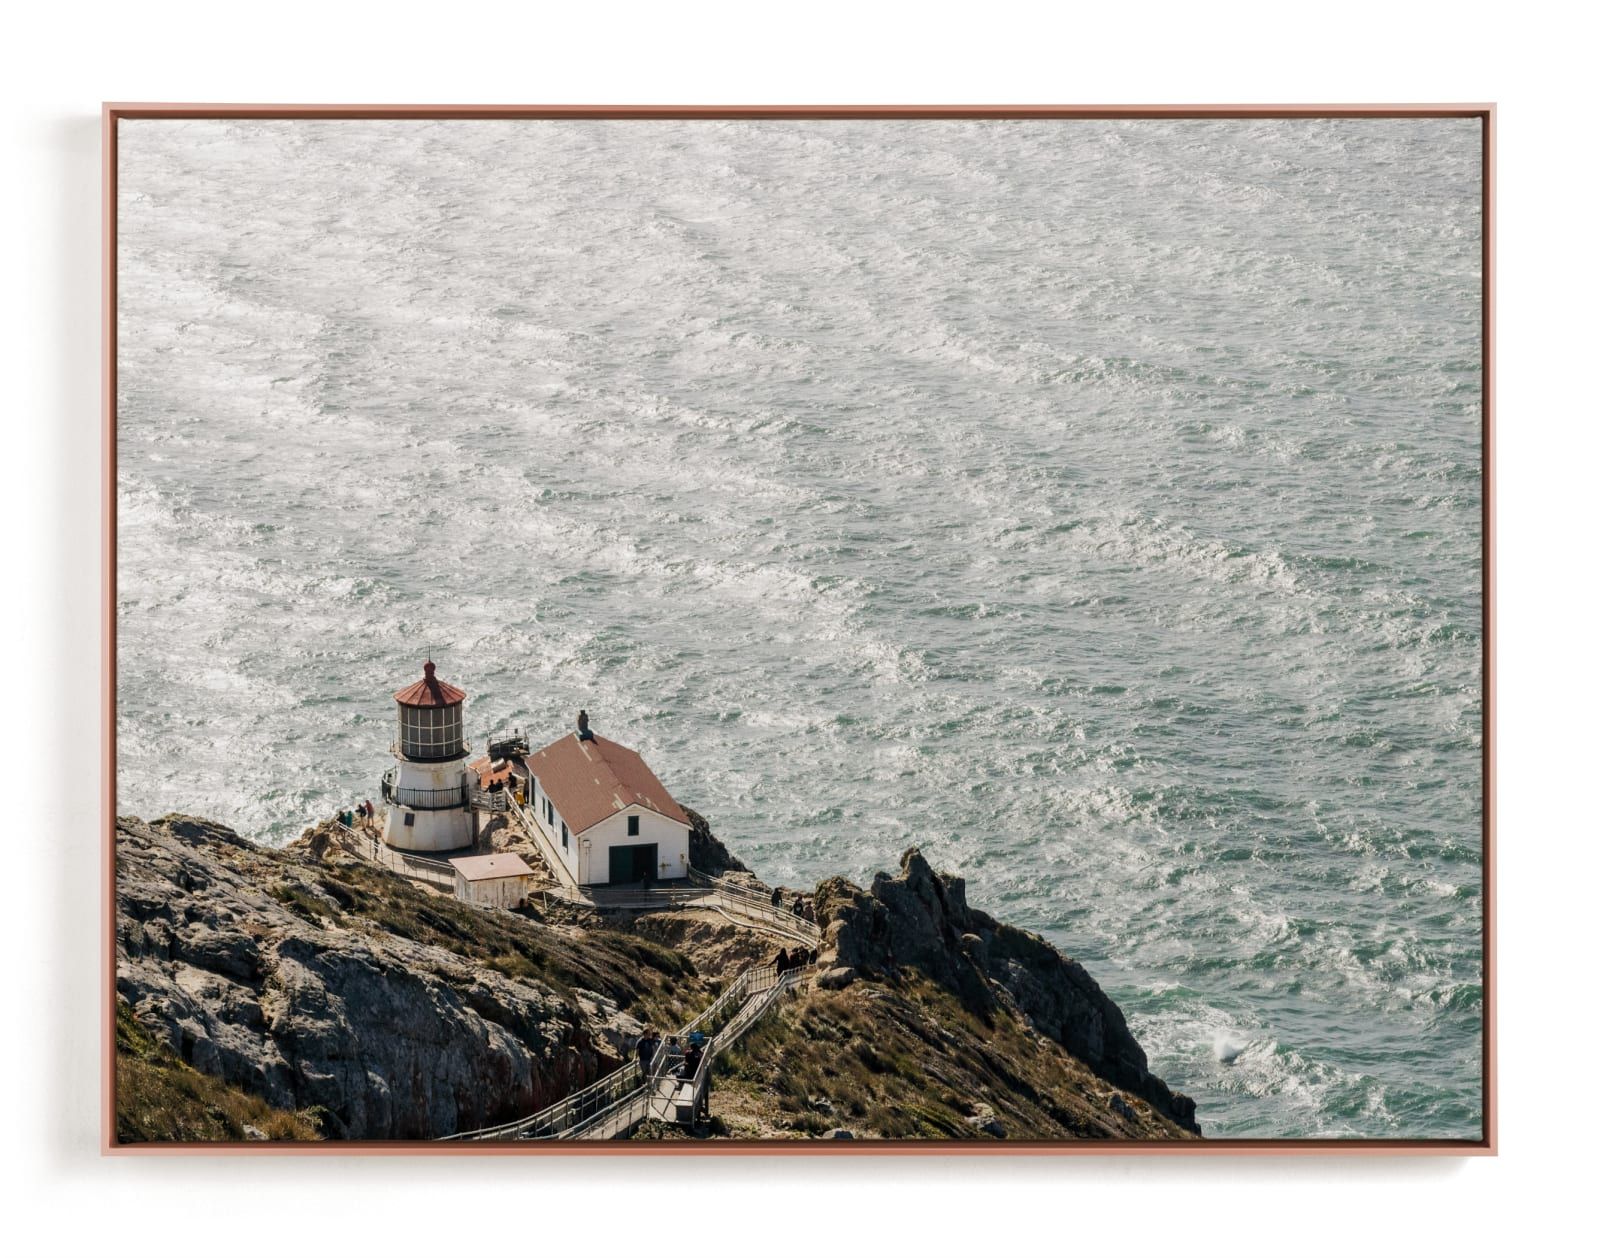 "Point Reyes Lighthouse Overlook" - Photography Limited Edition Art Print by Jenna Gibson. | Minted